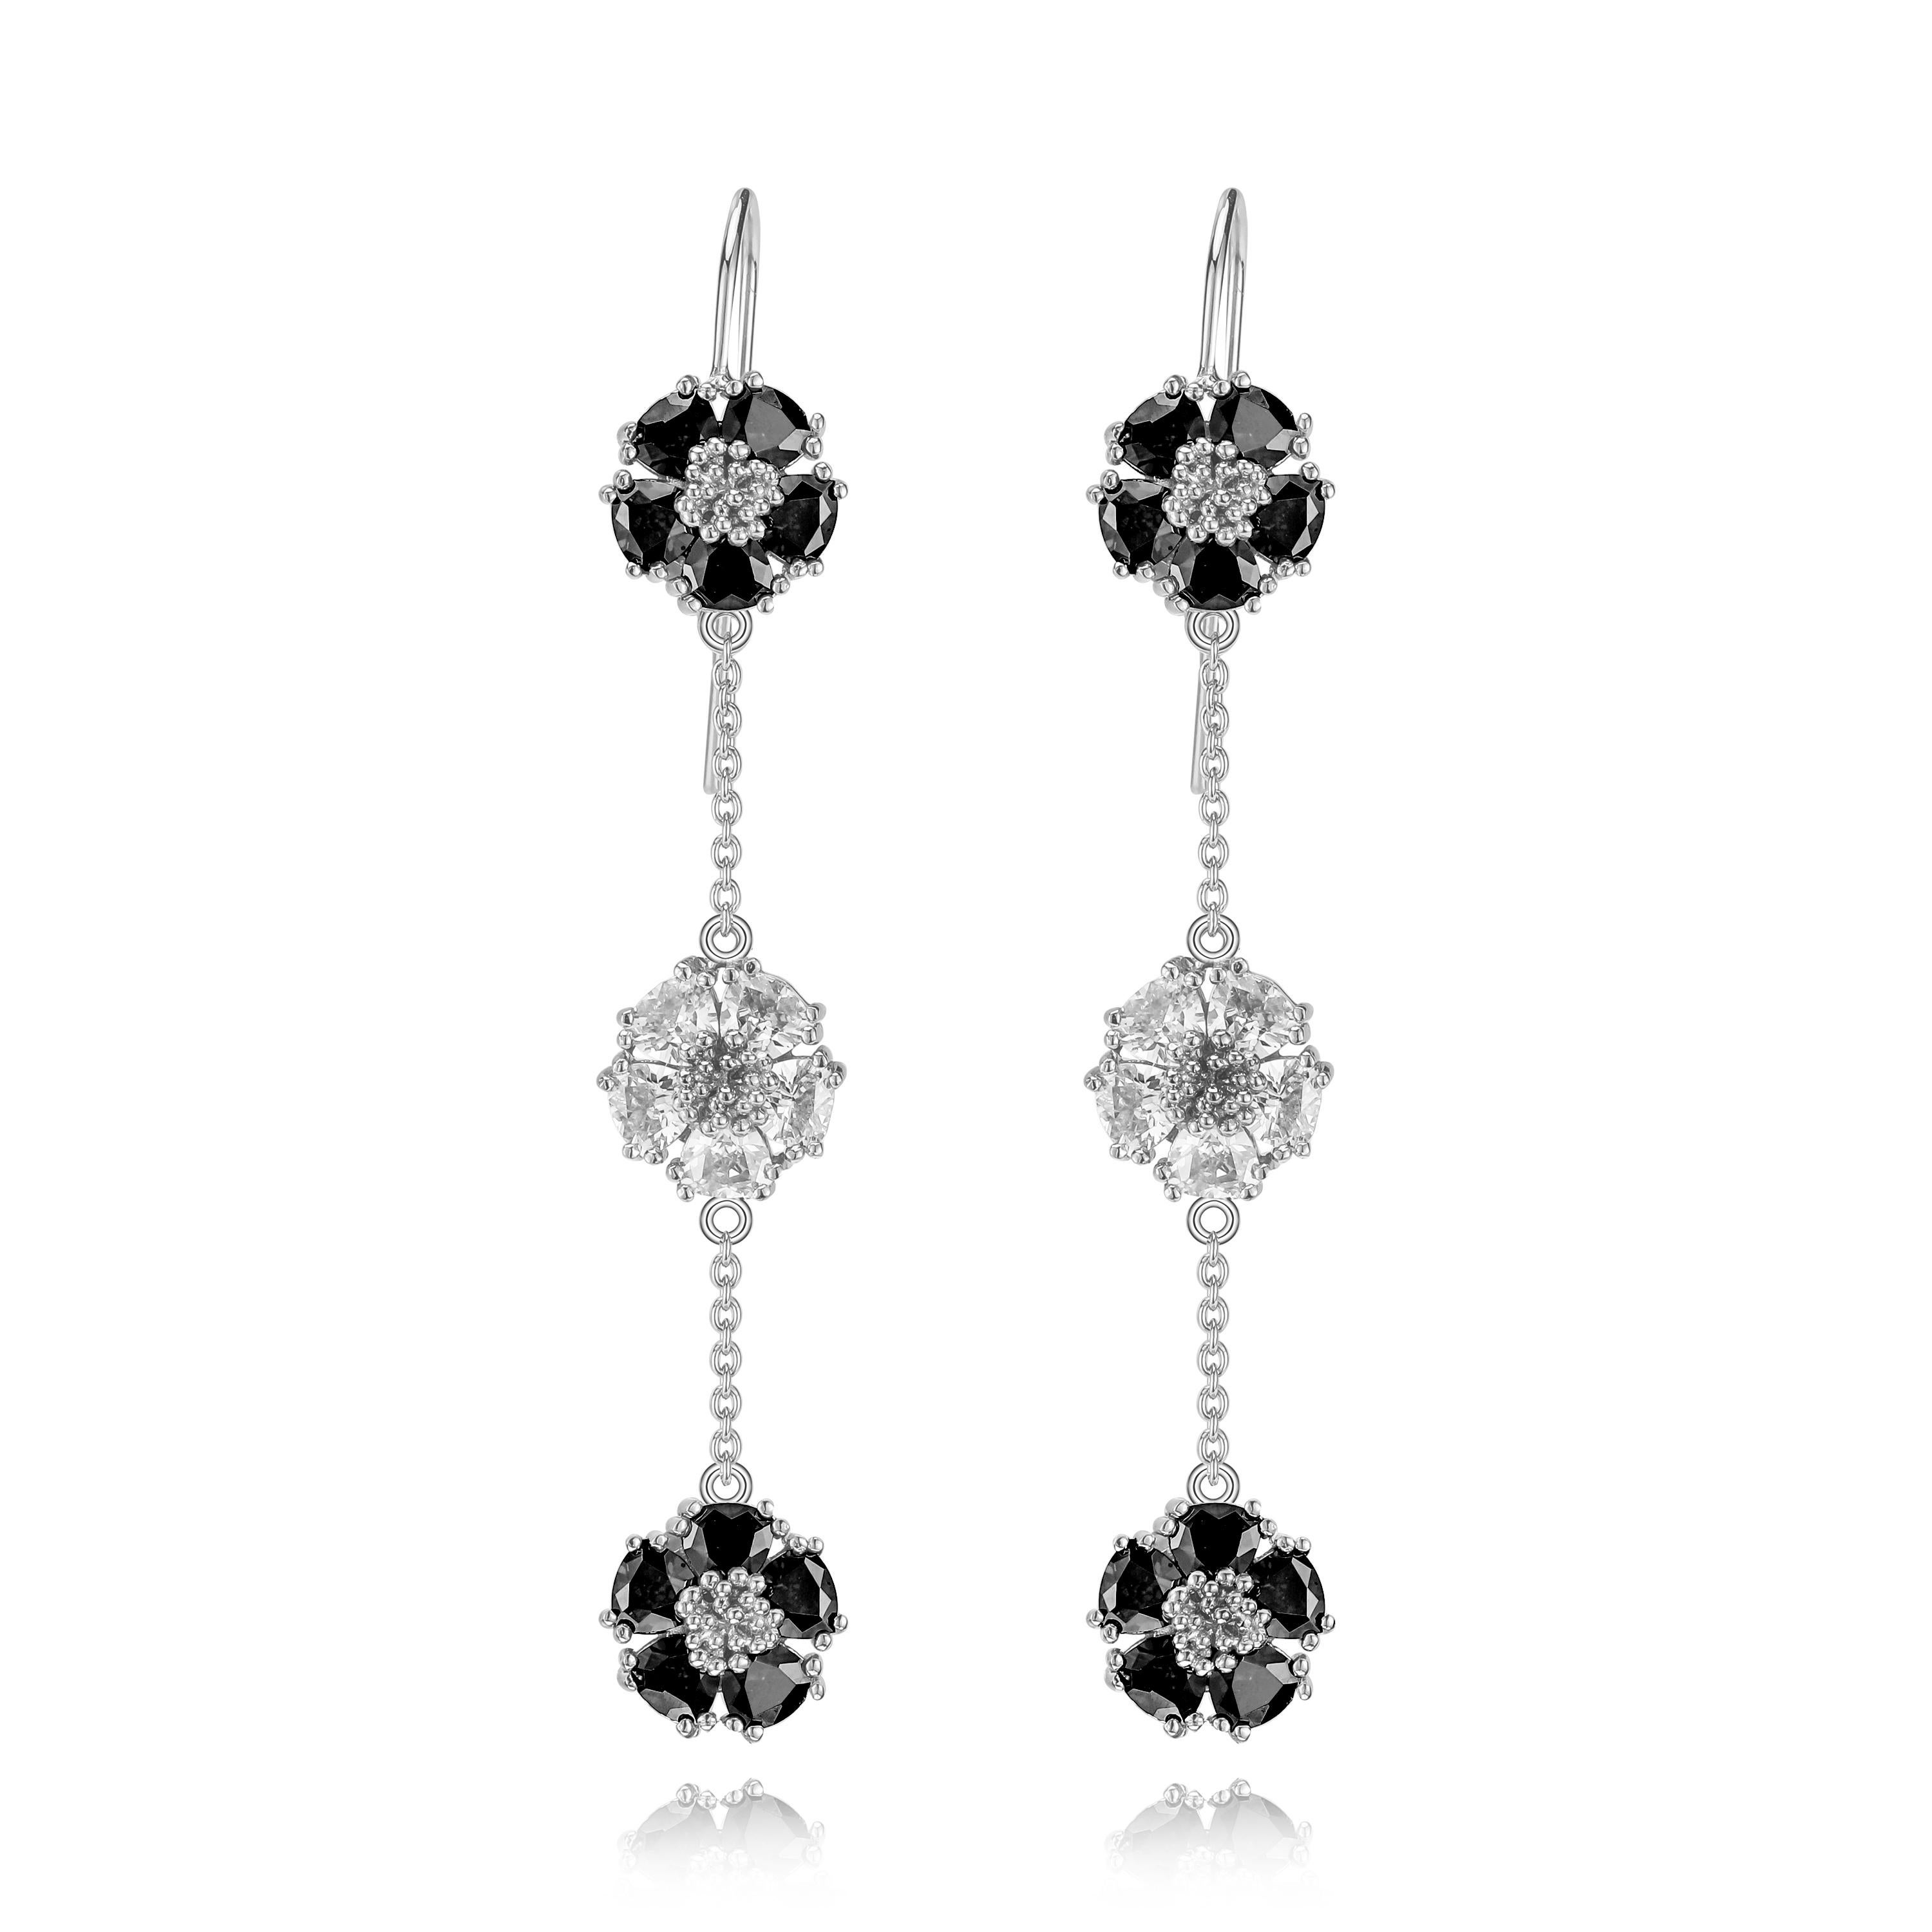 Modern Dark and Light Blue Sapphire and Aquamarine Blossom Gentile Chandelier Earrings For Sale